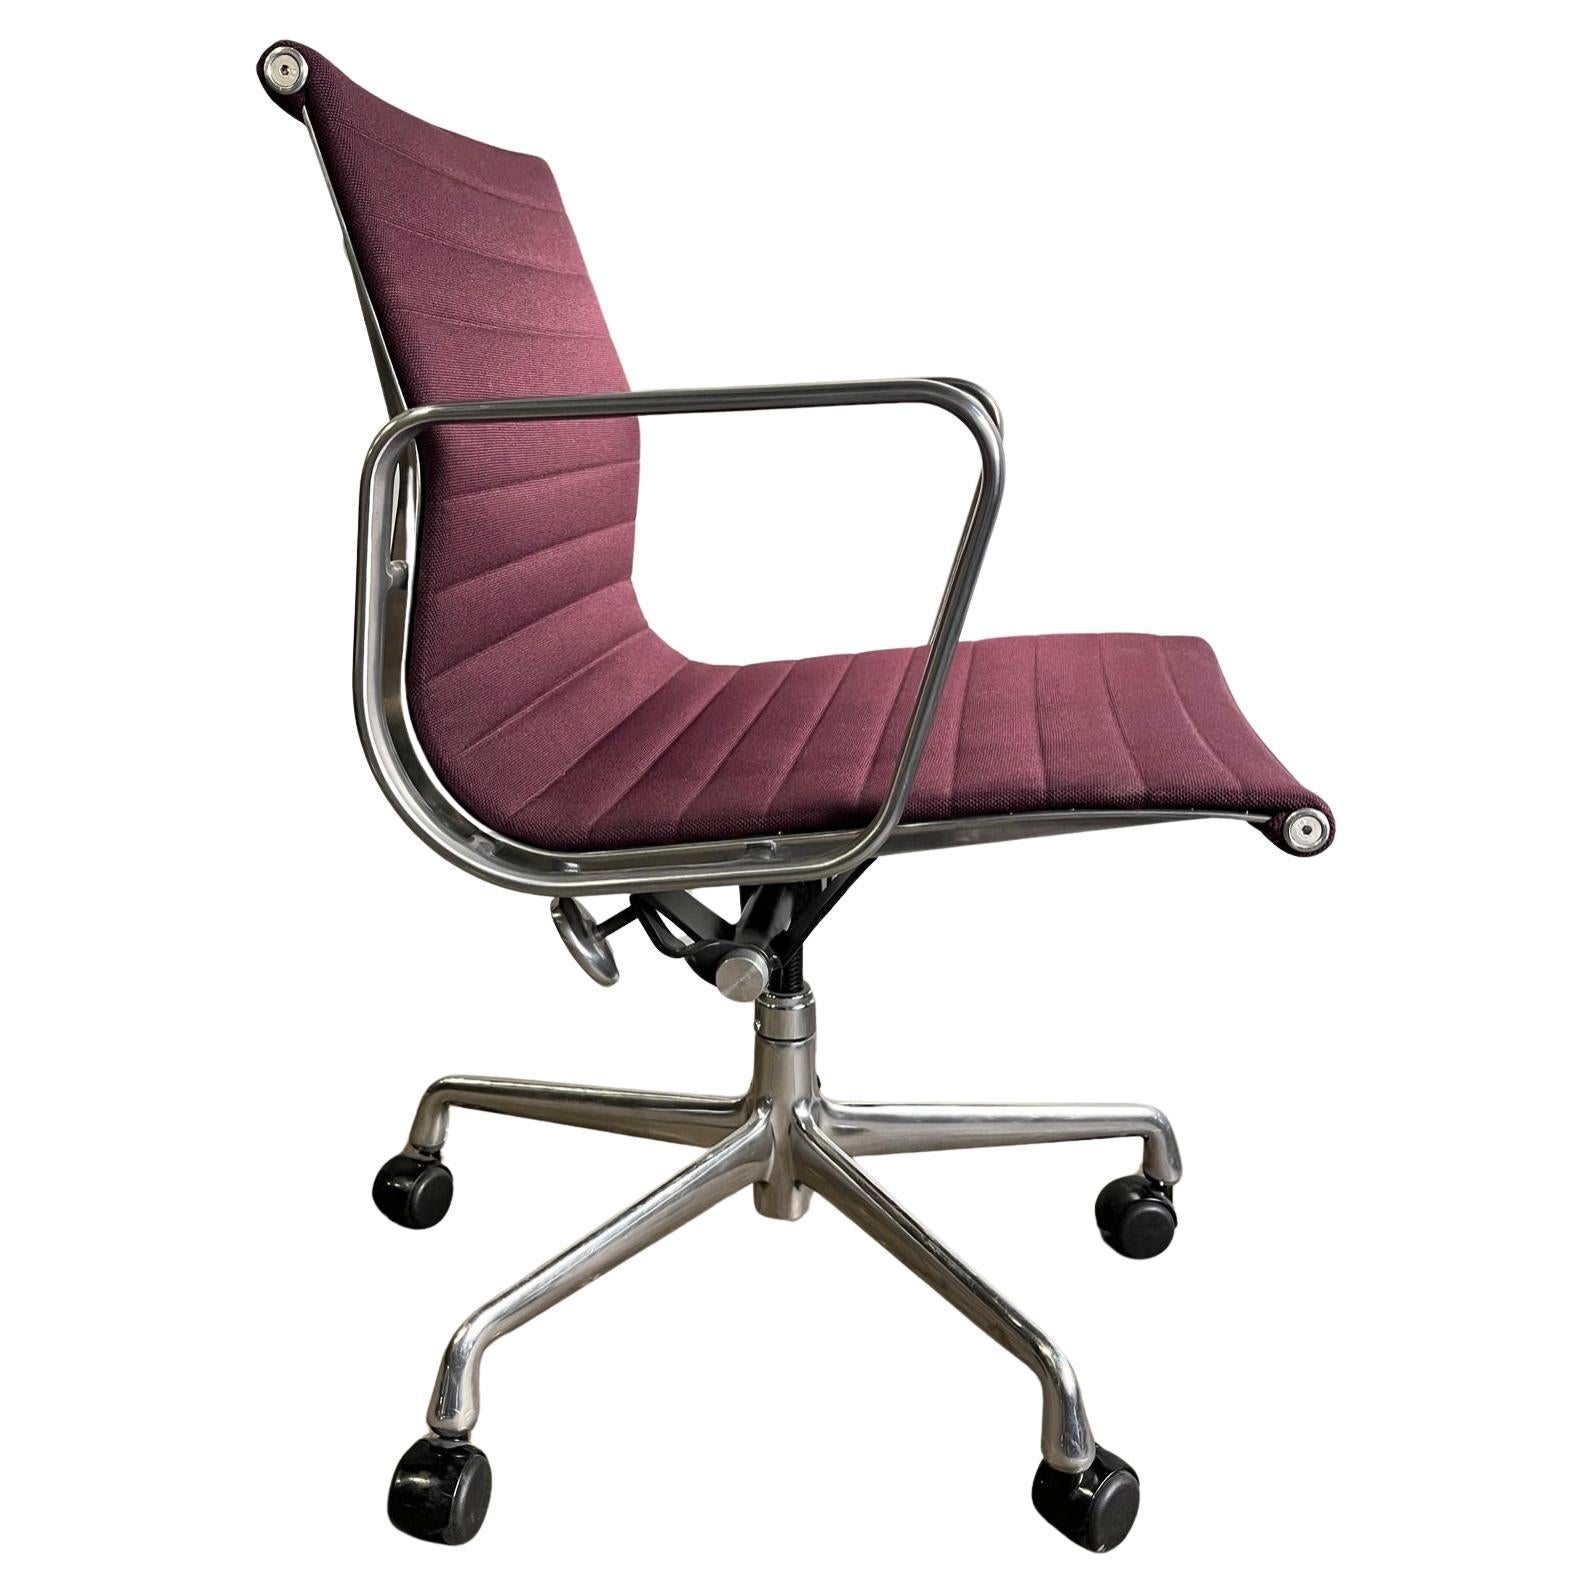 Eames Aluminum Group Management Chairs for Herman Miller ( up to 4 )